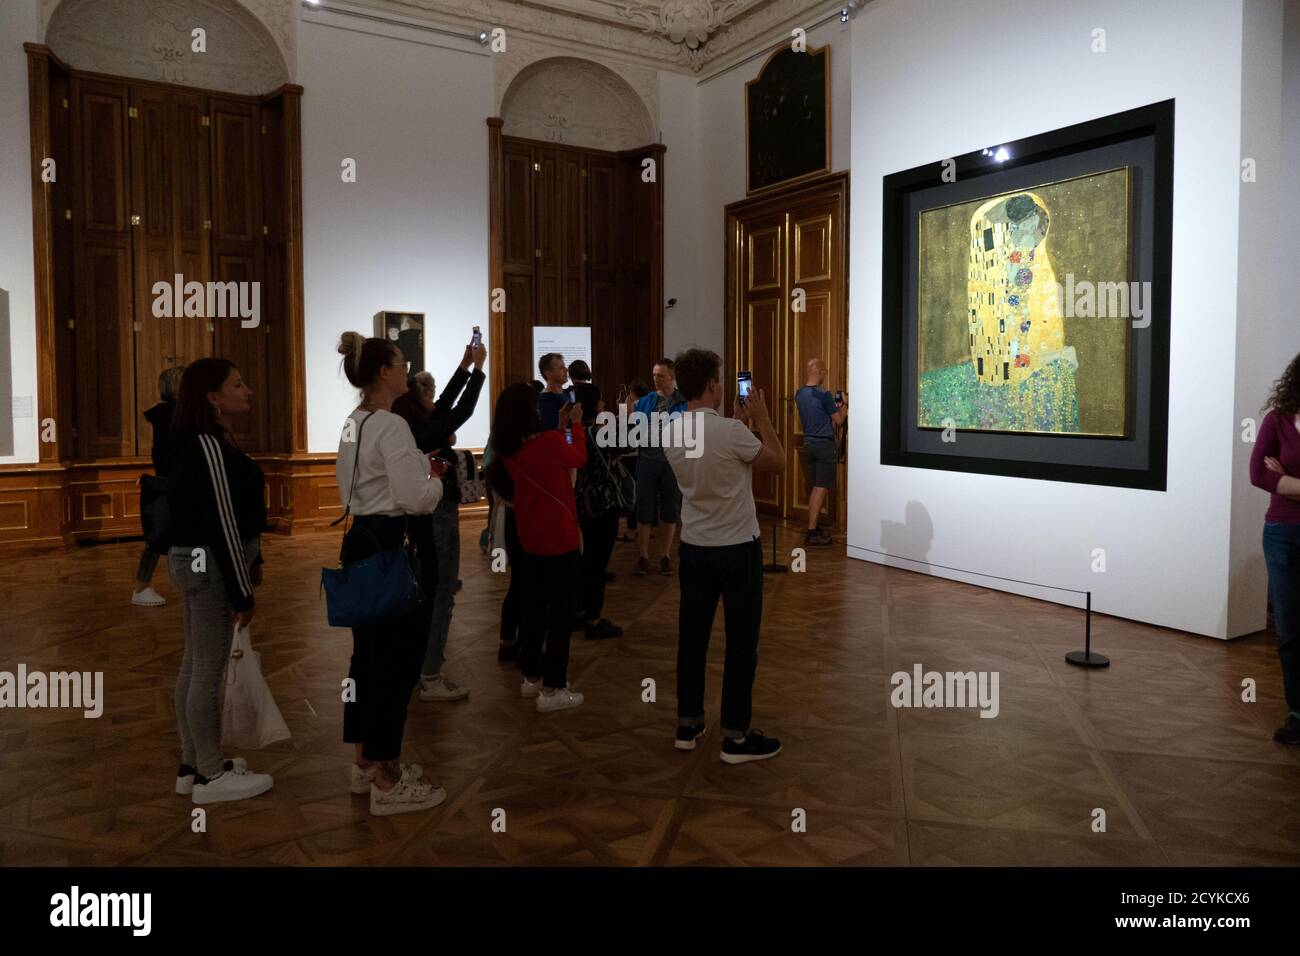 The Kiss, painting by Gustav Klimt at Belvedere Museum in Vienna, Austria, Europe. Art exhibition and collection with people, tourists, visitors Stock Photo